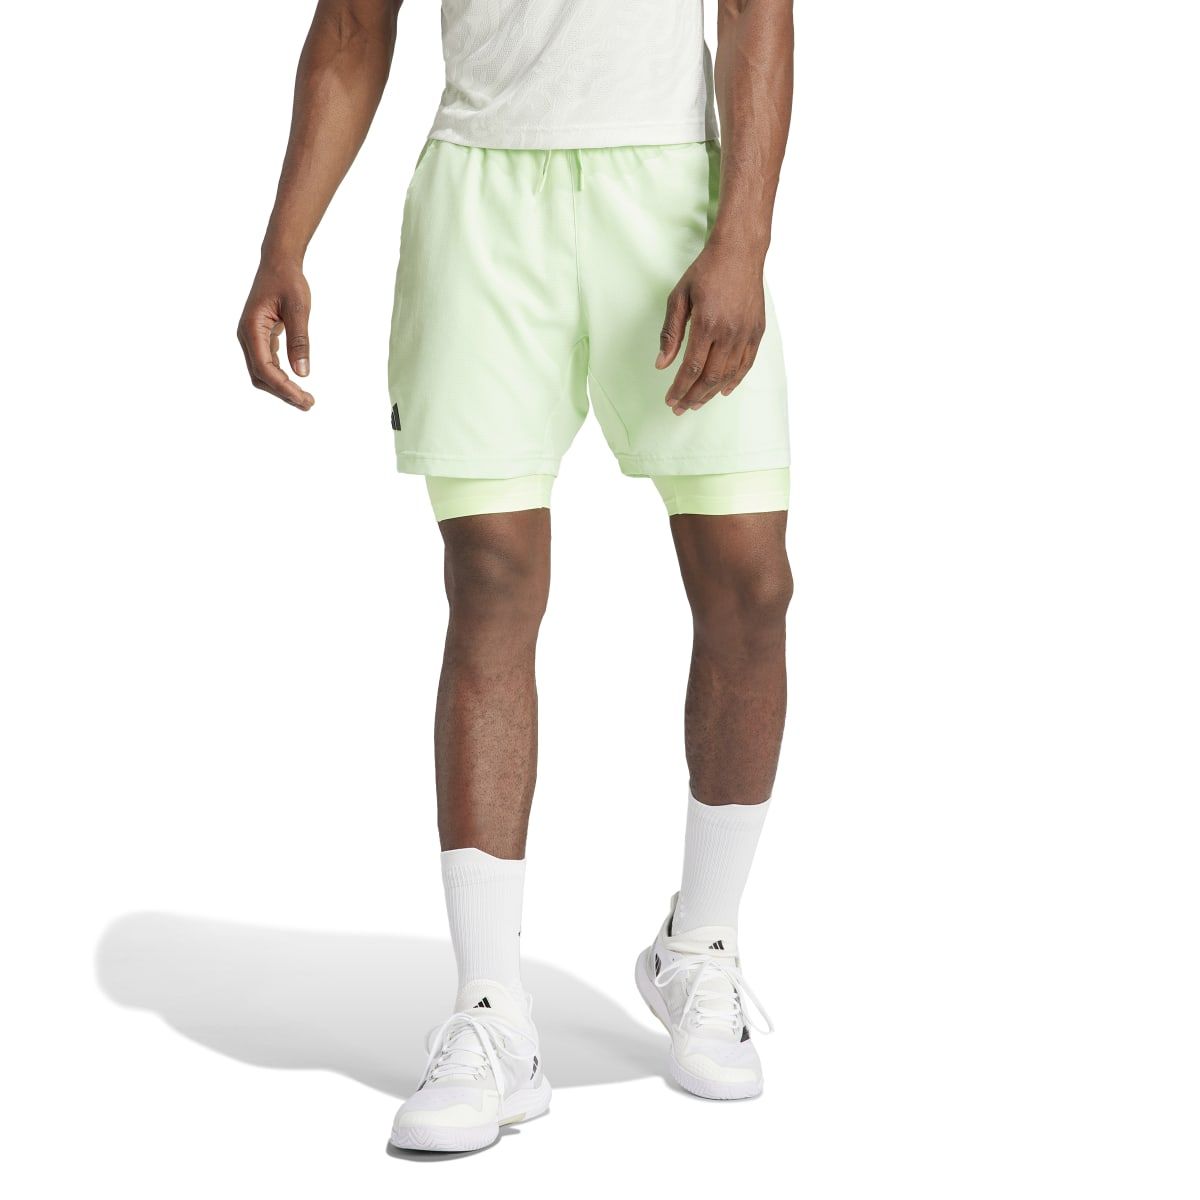 adidas HEAT.RDY Shorts and Inner Men's Tennis Shorts Set IL7